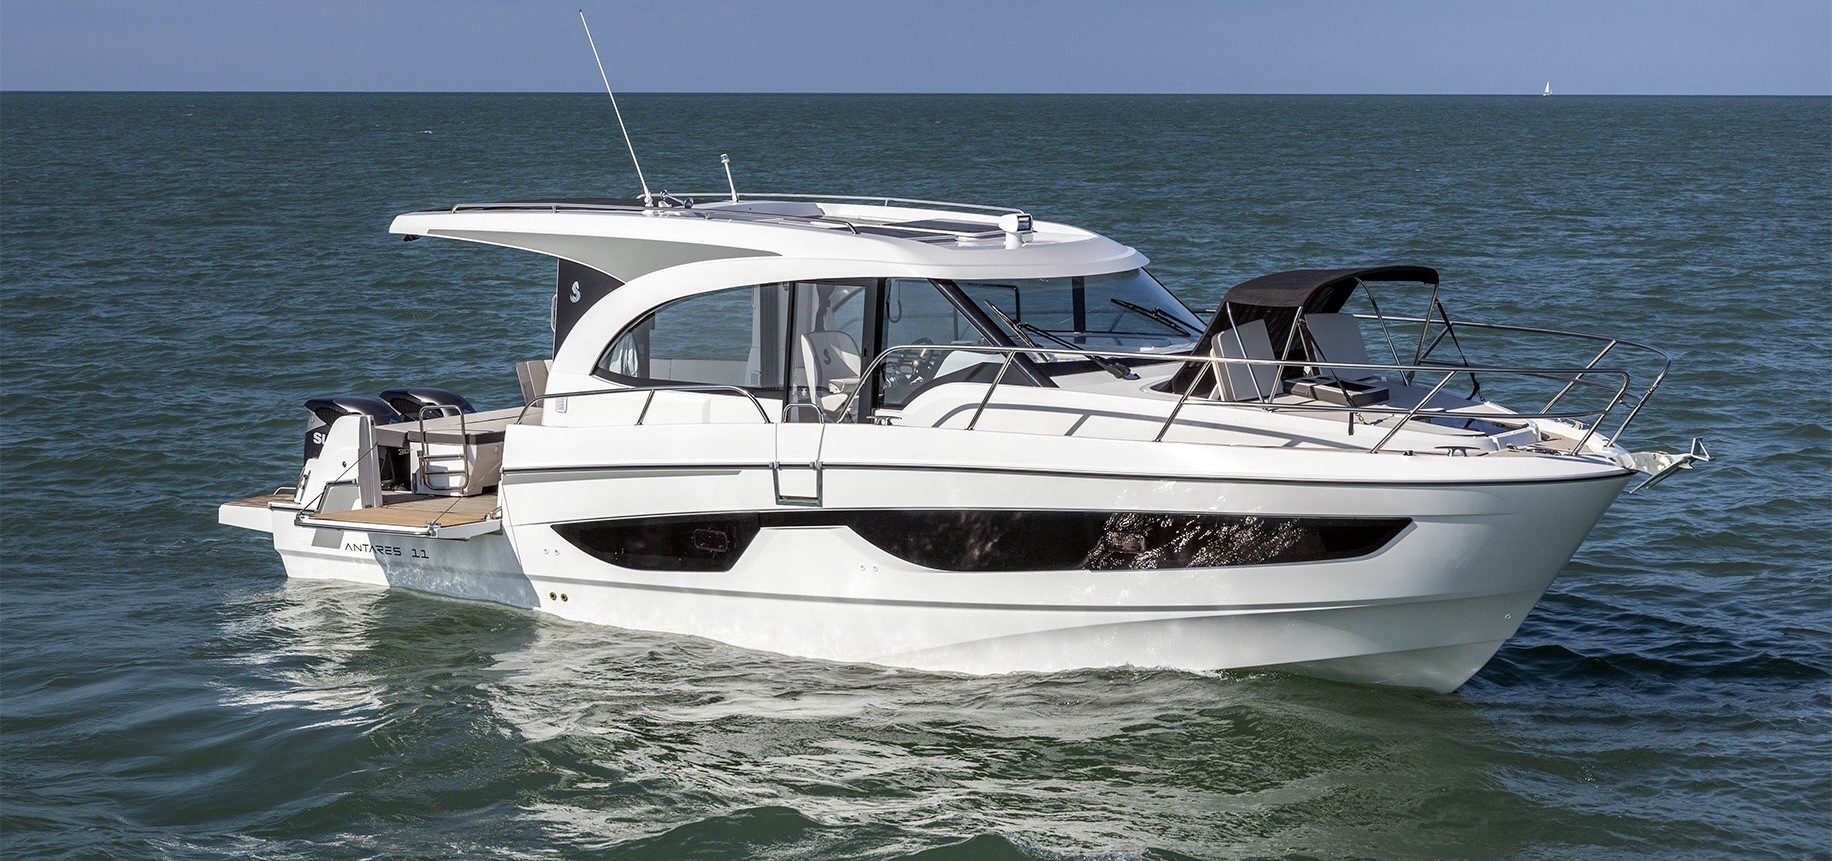 The Antares 11 Outboard by Beneteau Outboard